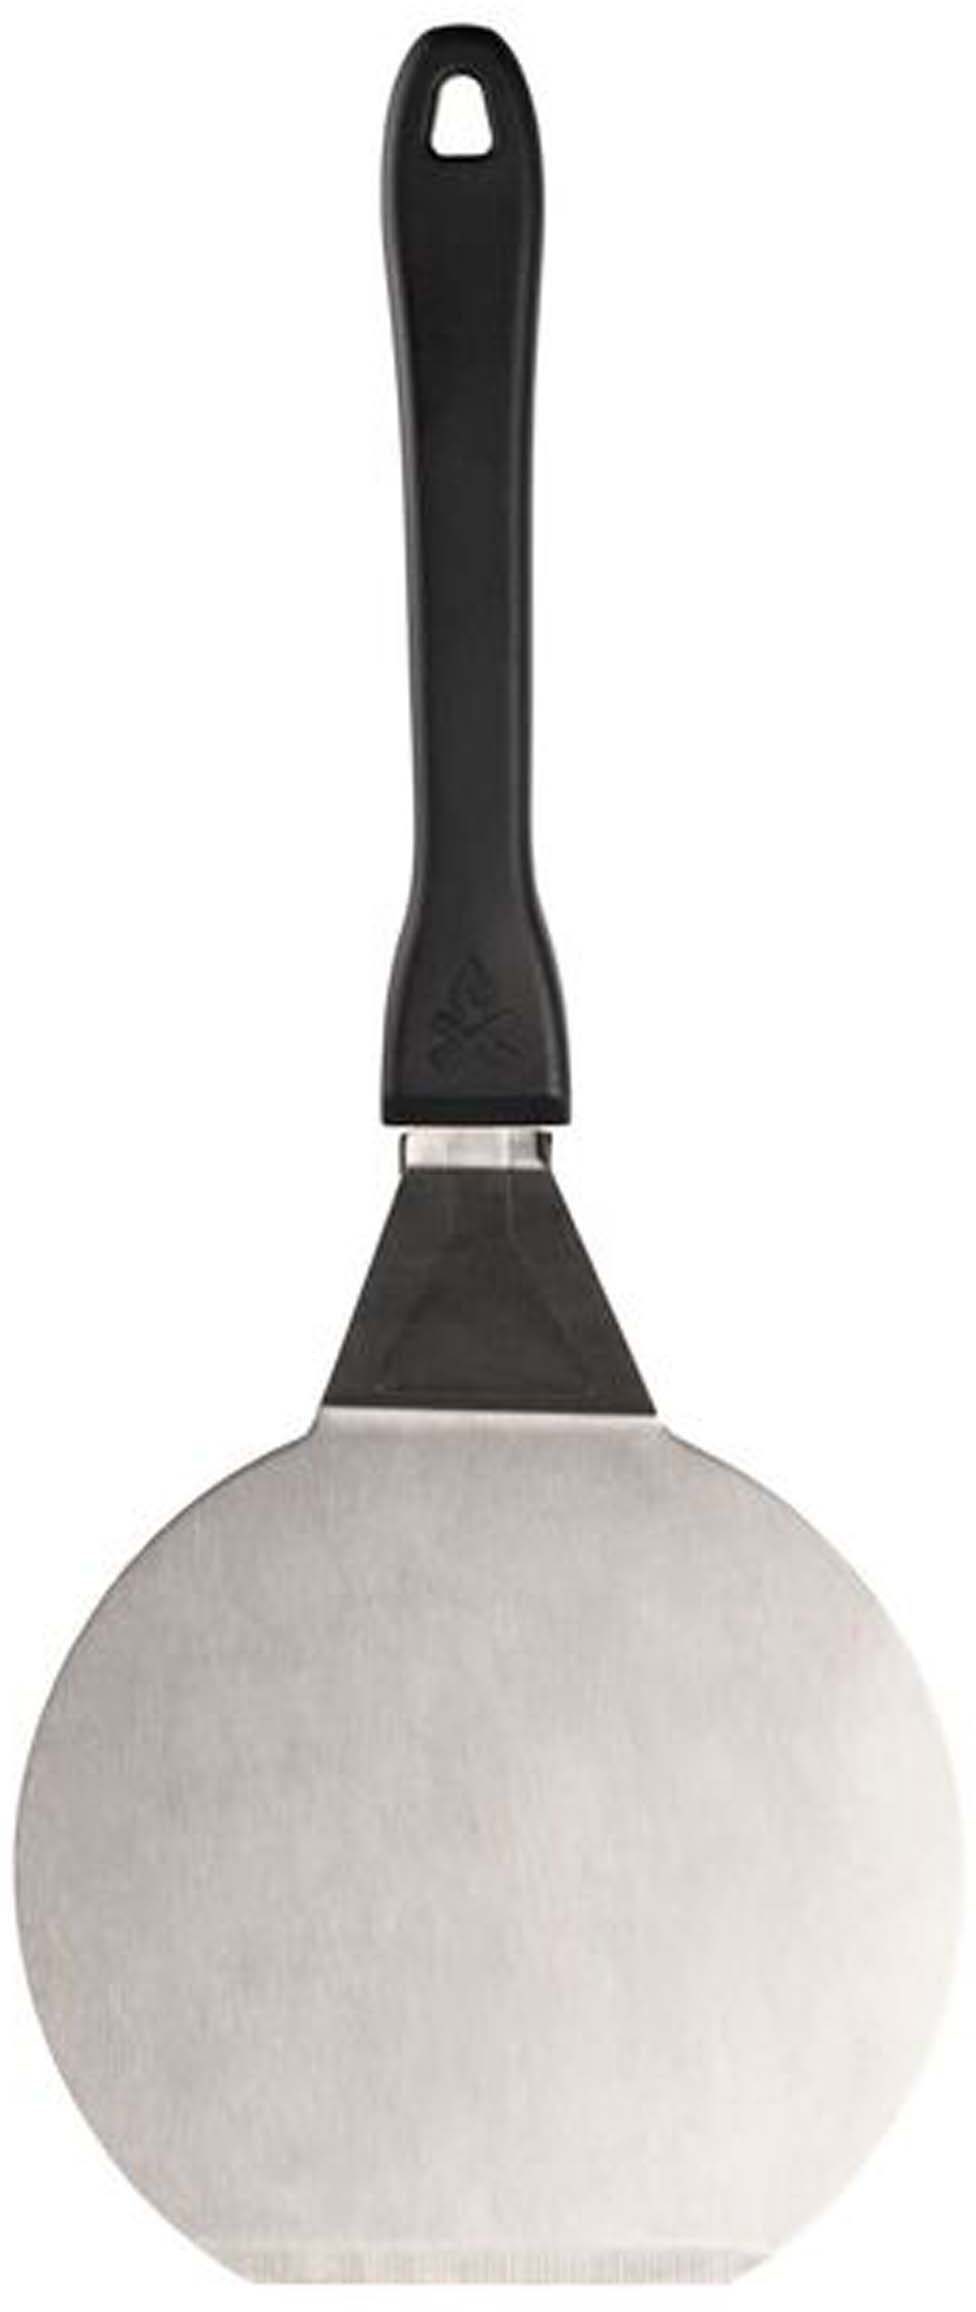 https://cs1.0ps.us/original/opplanet-camp-chef-pizza-spatula-stainless-steel-sppz-m